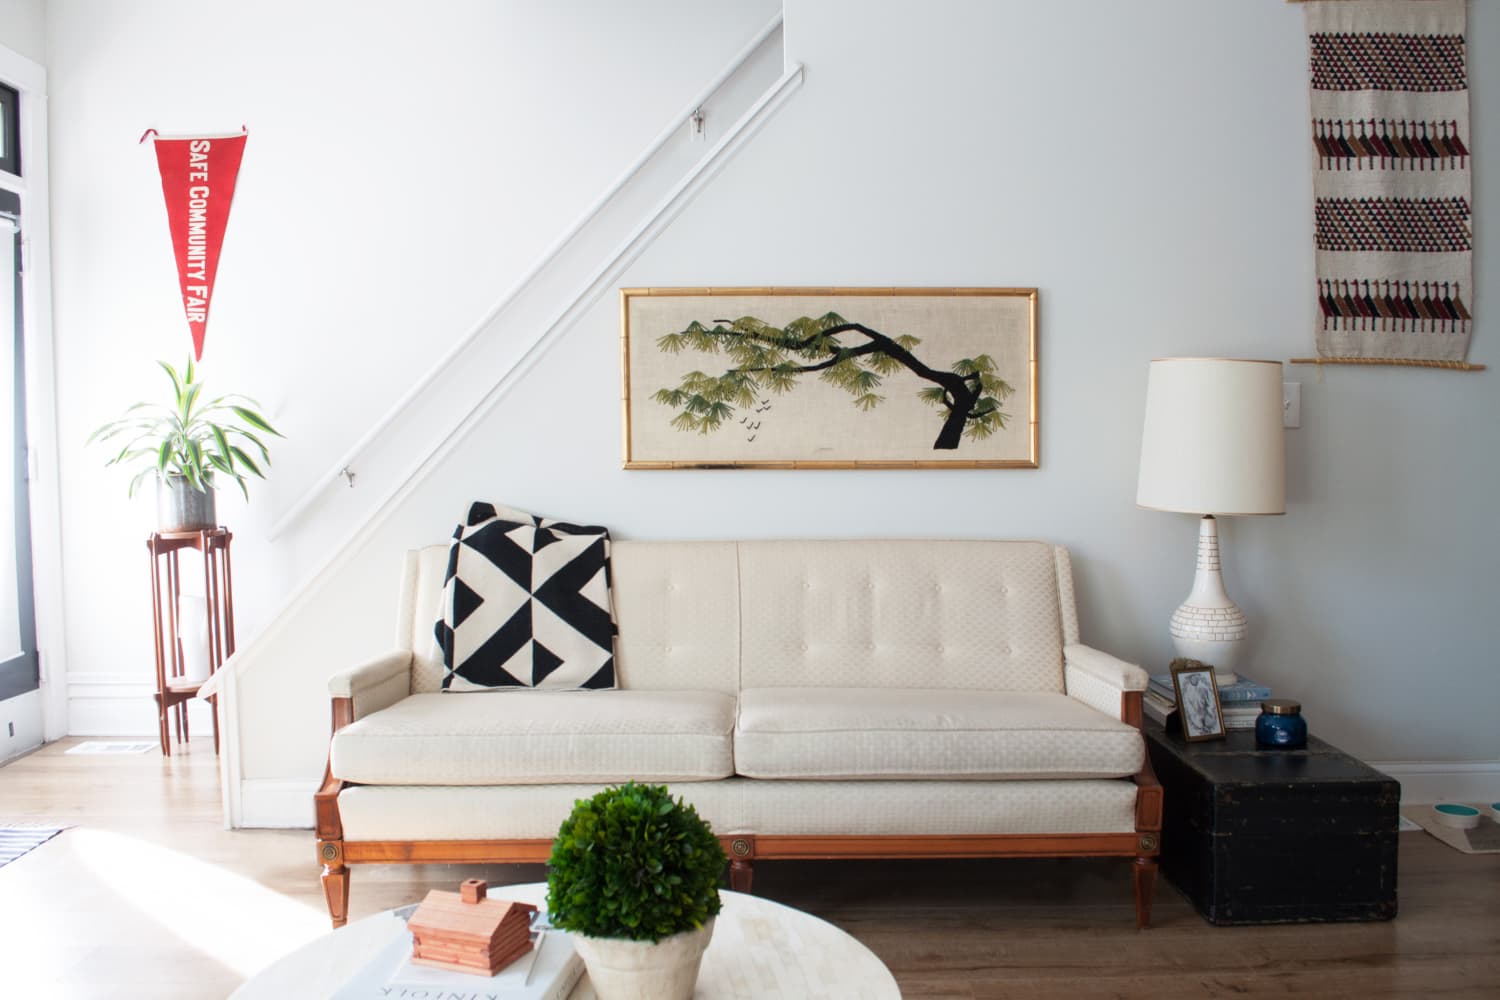 The Ultimate Guide to Pillows for a White Couch – EVERAND